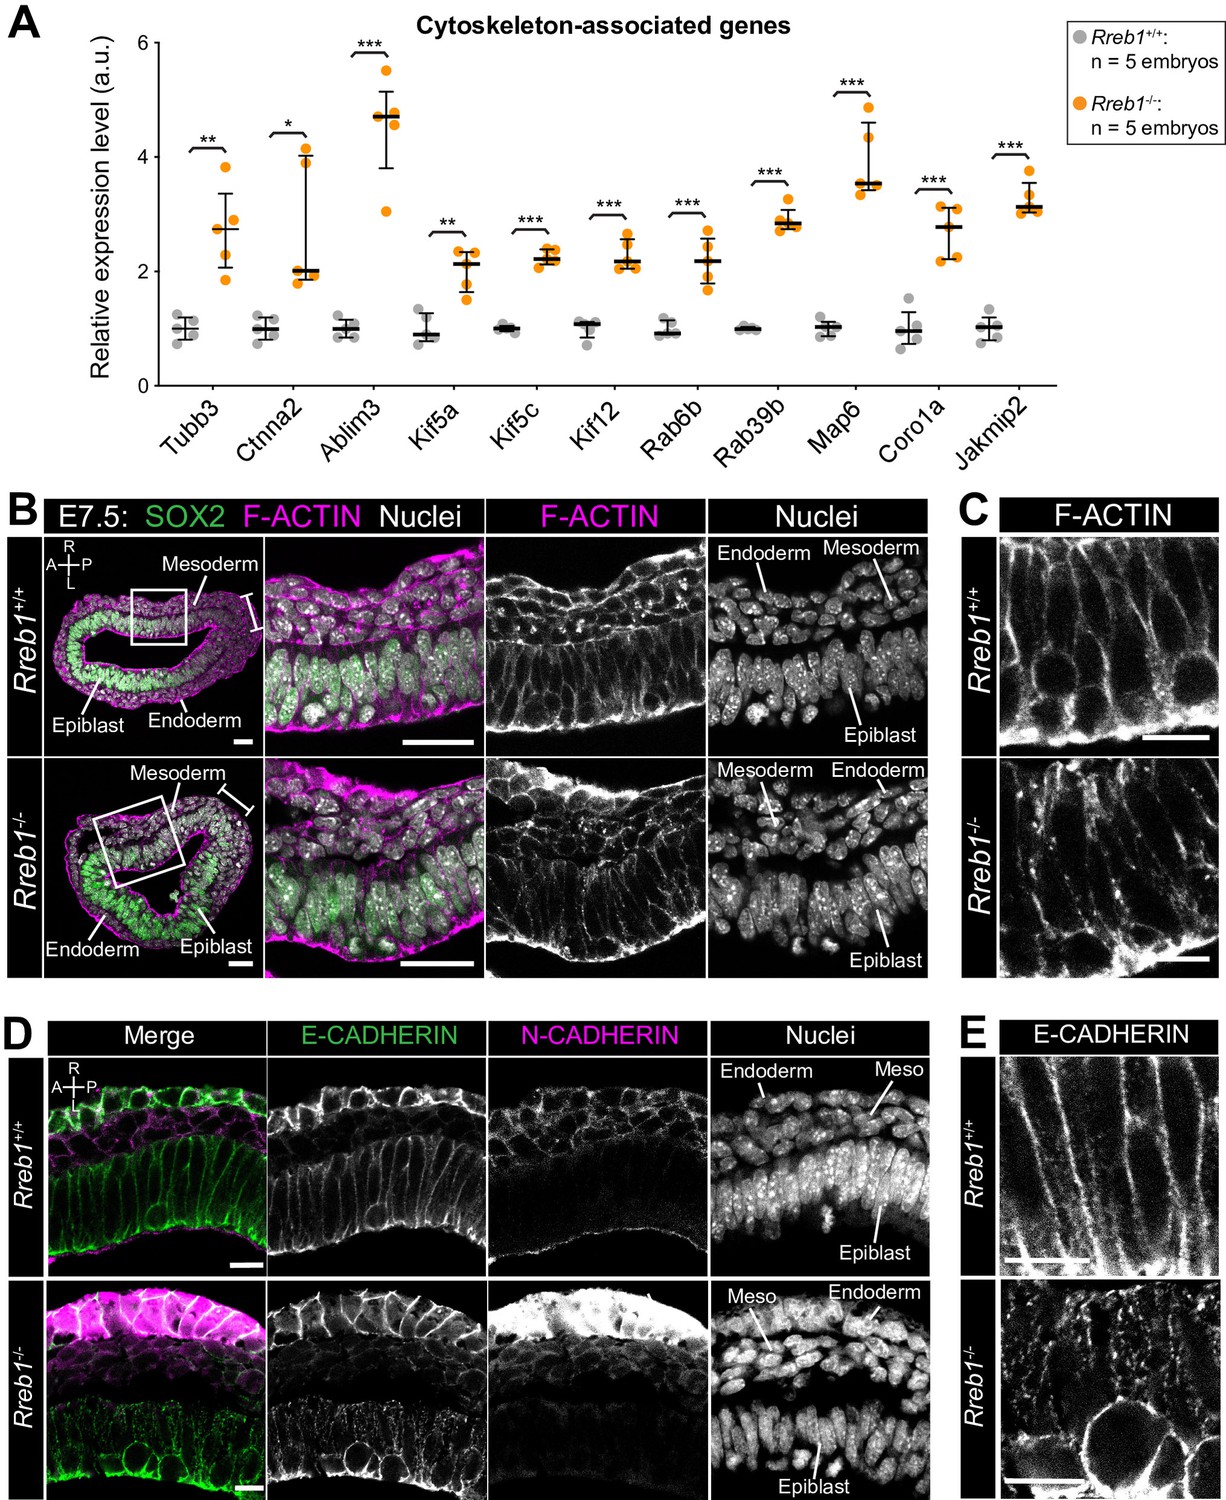 The Transcription Factor Rreb1 Regulates Epithelial Architecture Invasiveness And Vasculogenesis In Early Mouse Embryos Elife